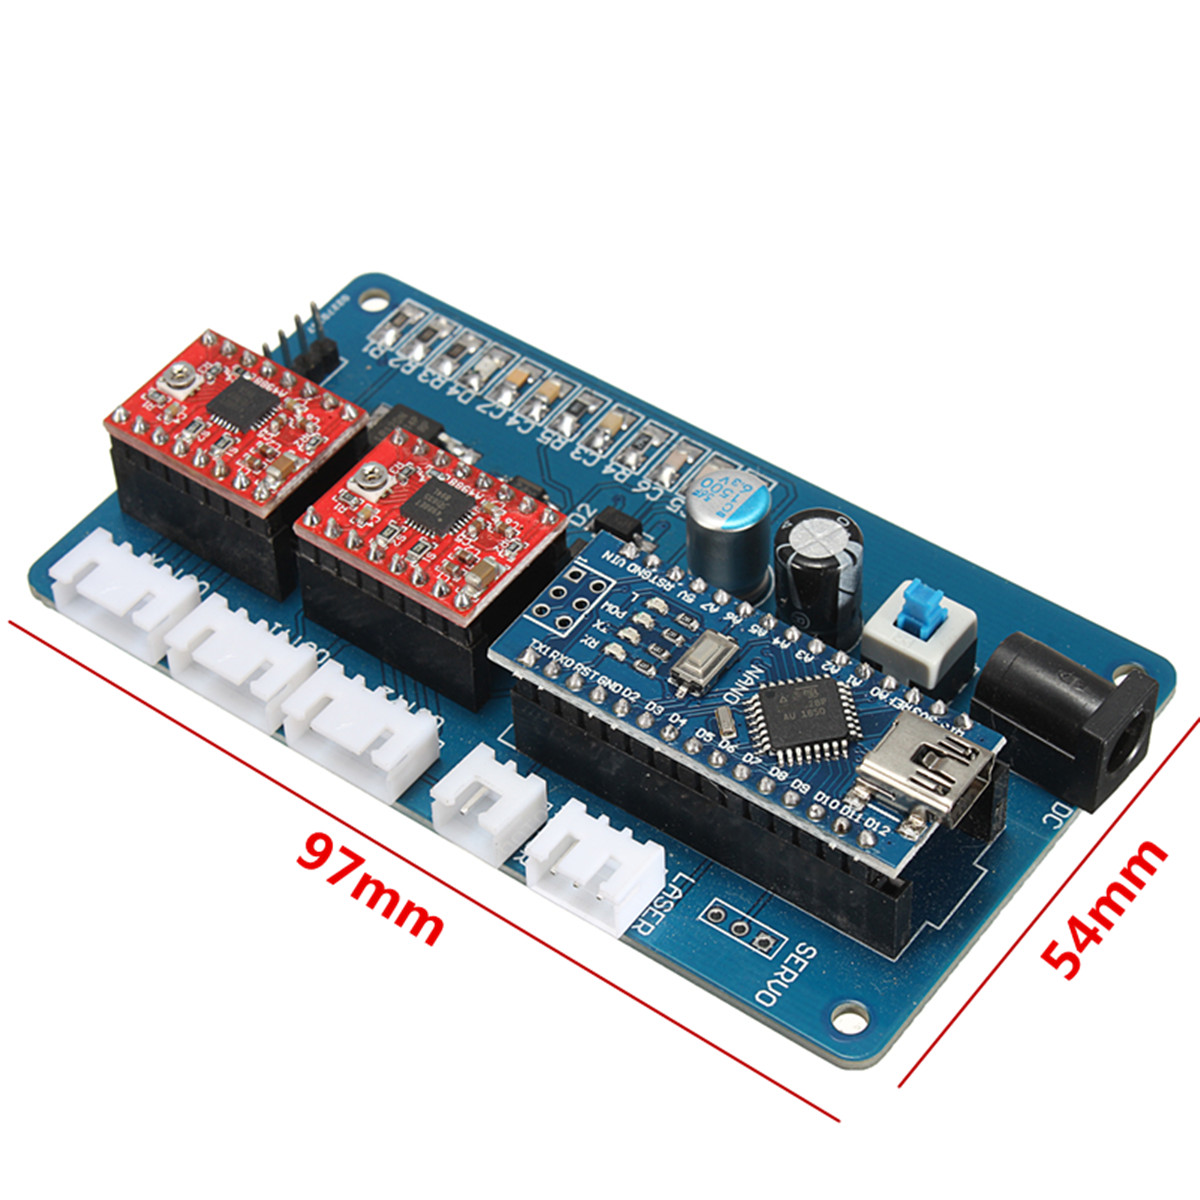 2 Axis GRBL Control Panel Board For DIY Laser Engraving Machine Benbox USB Stepper Driver Board 11